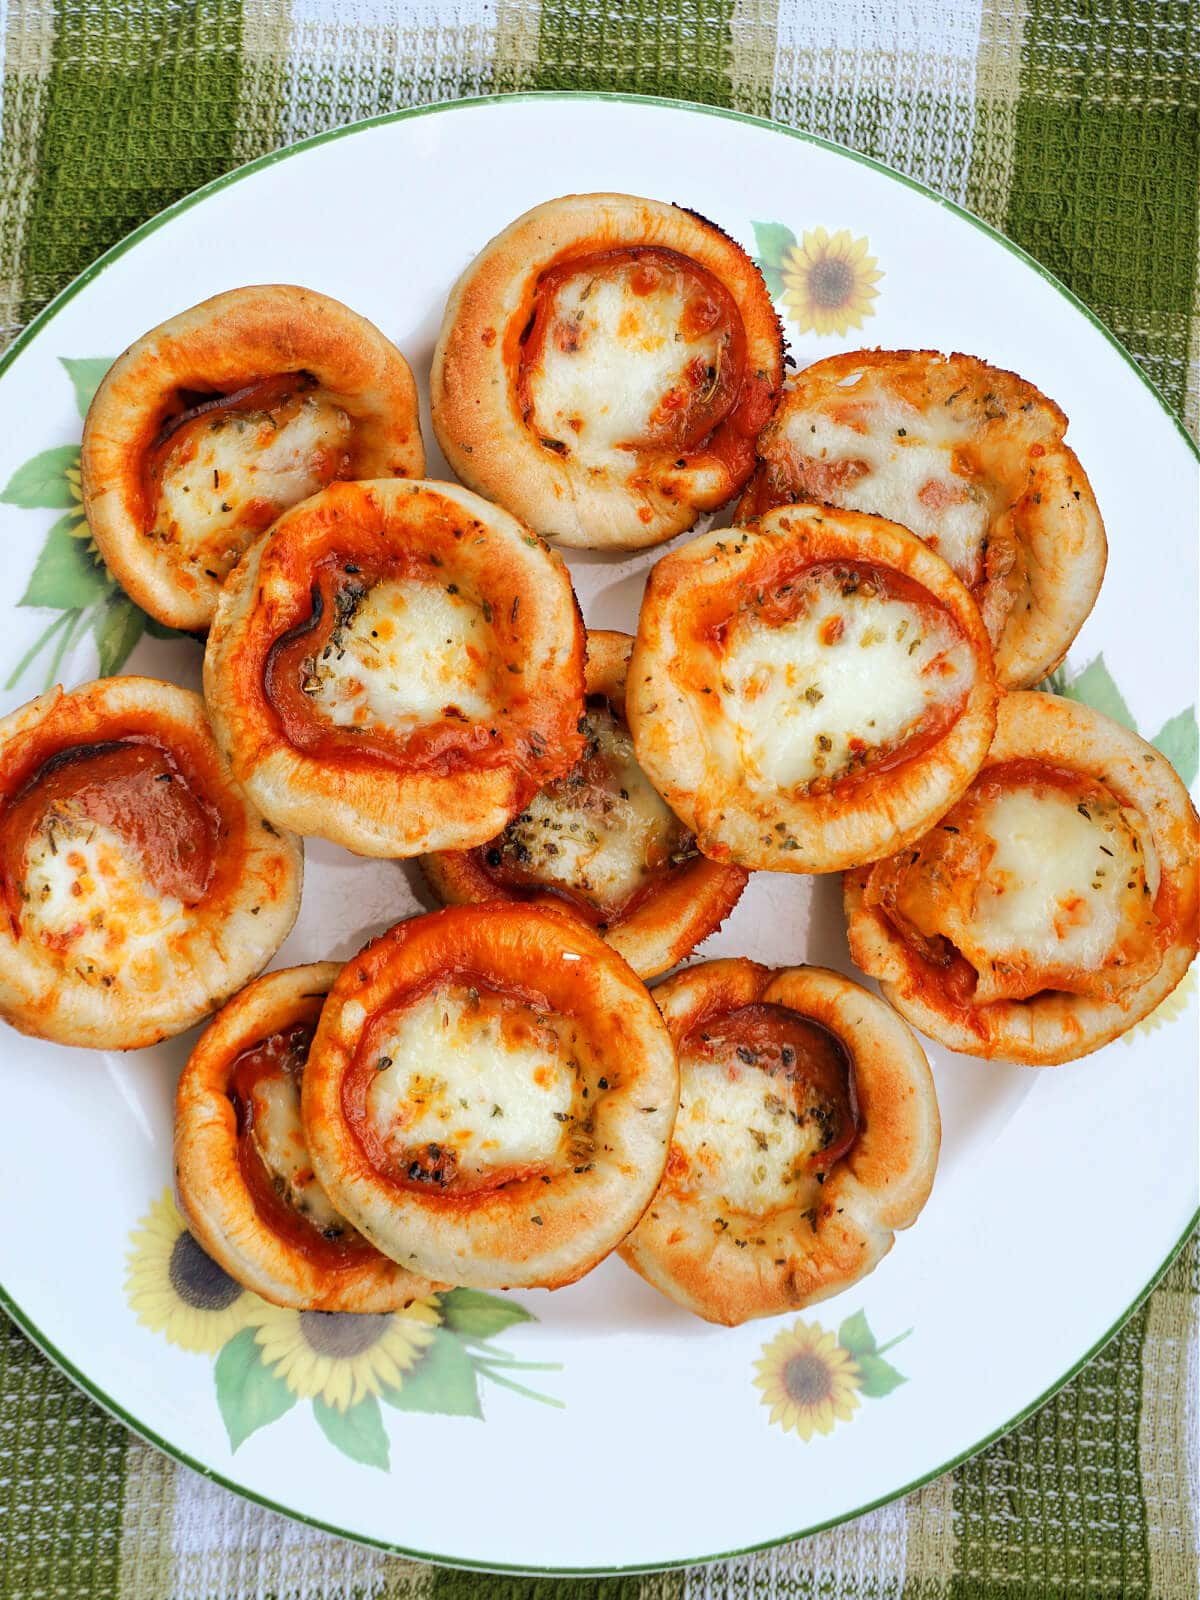  A plate with mini pepperoni pizzas.